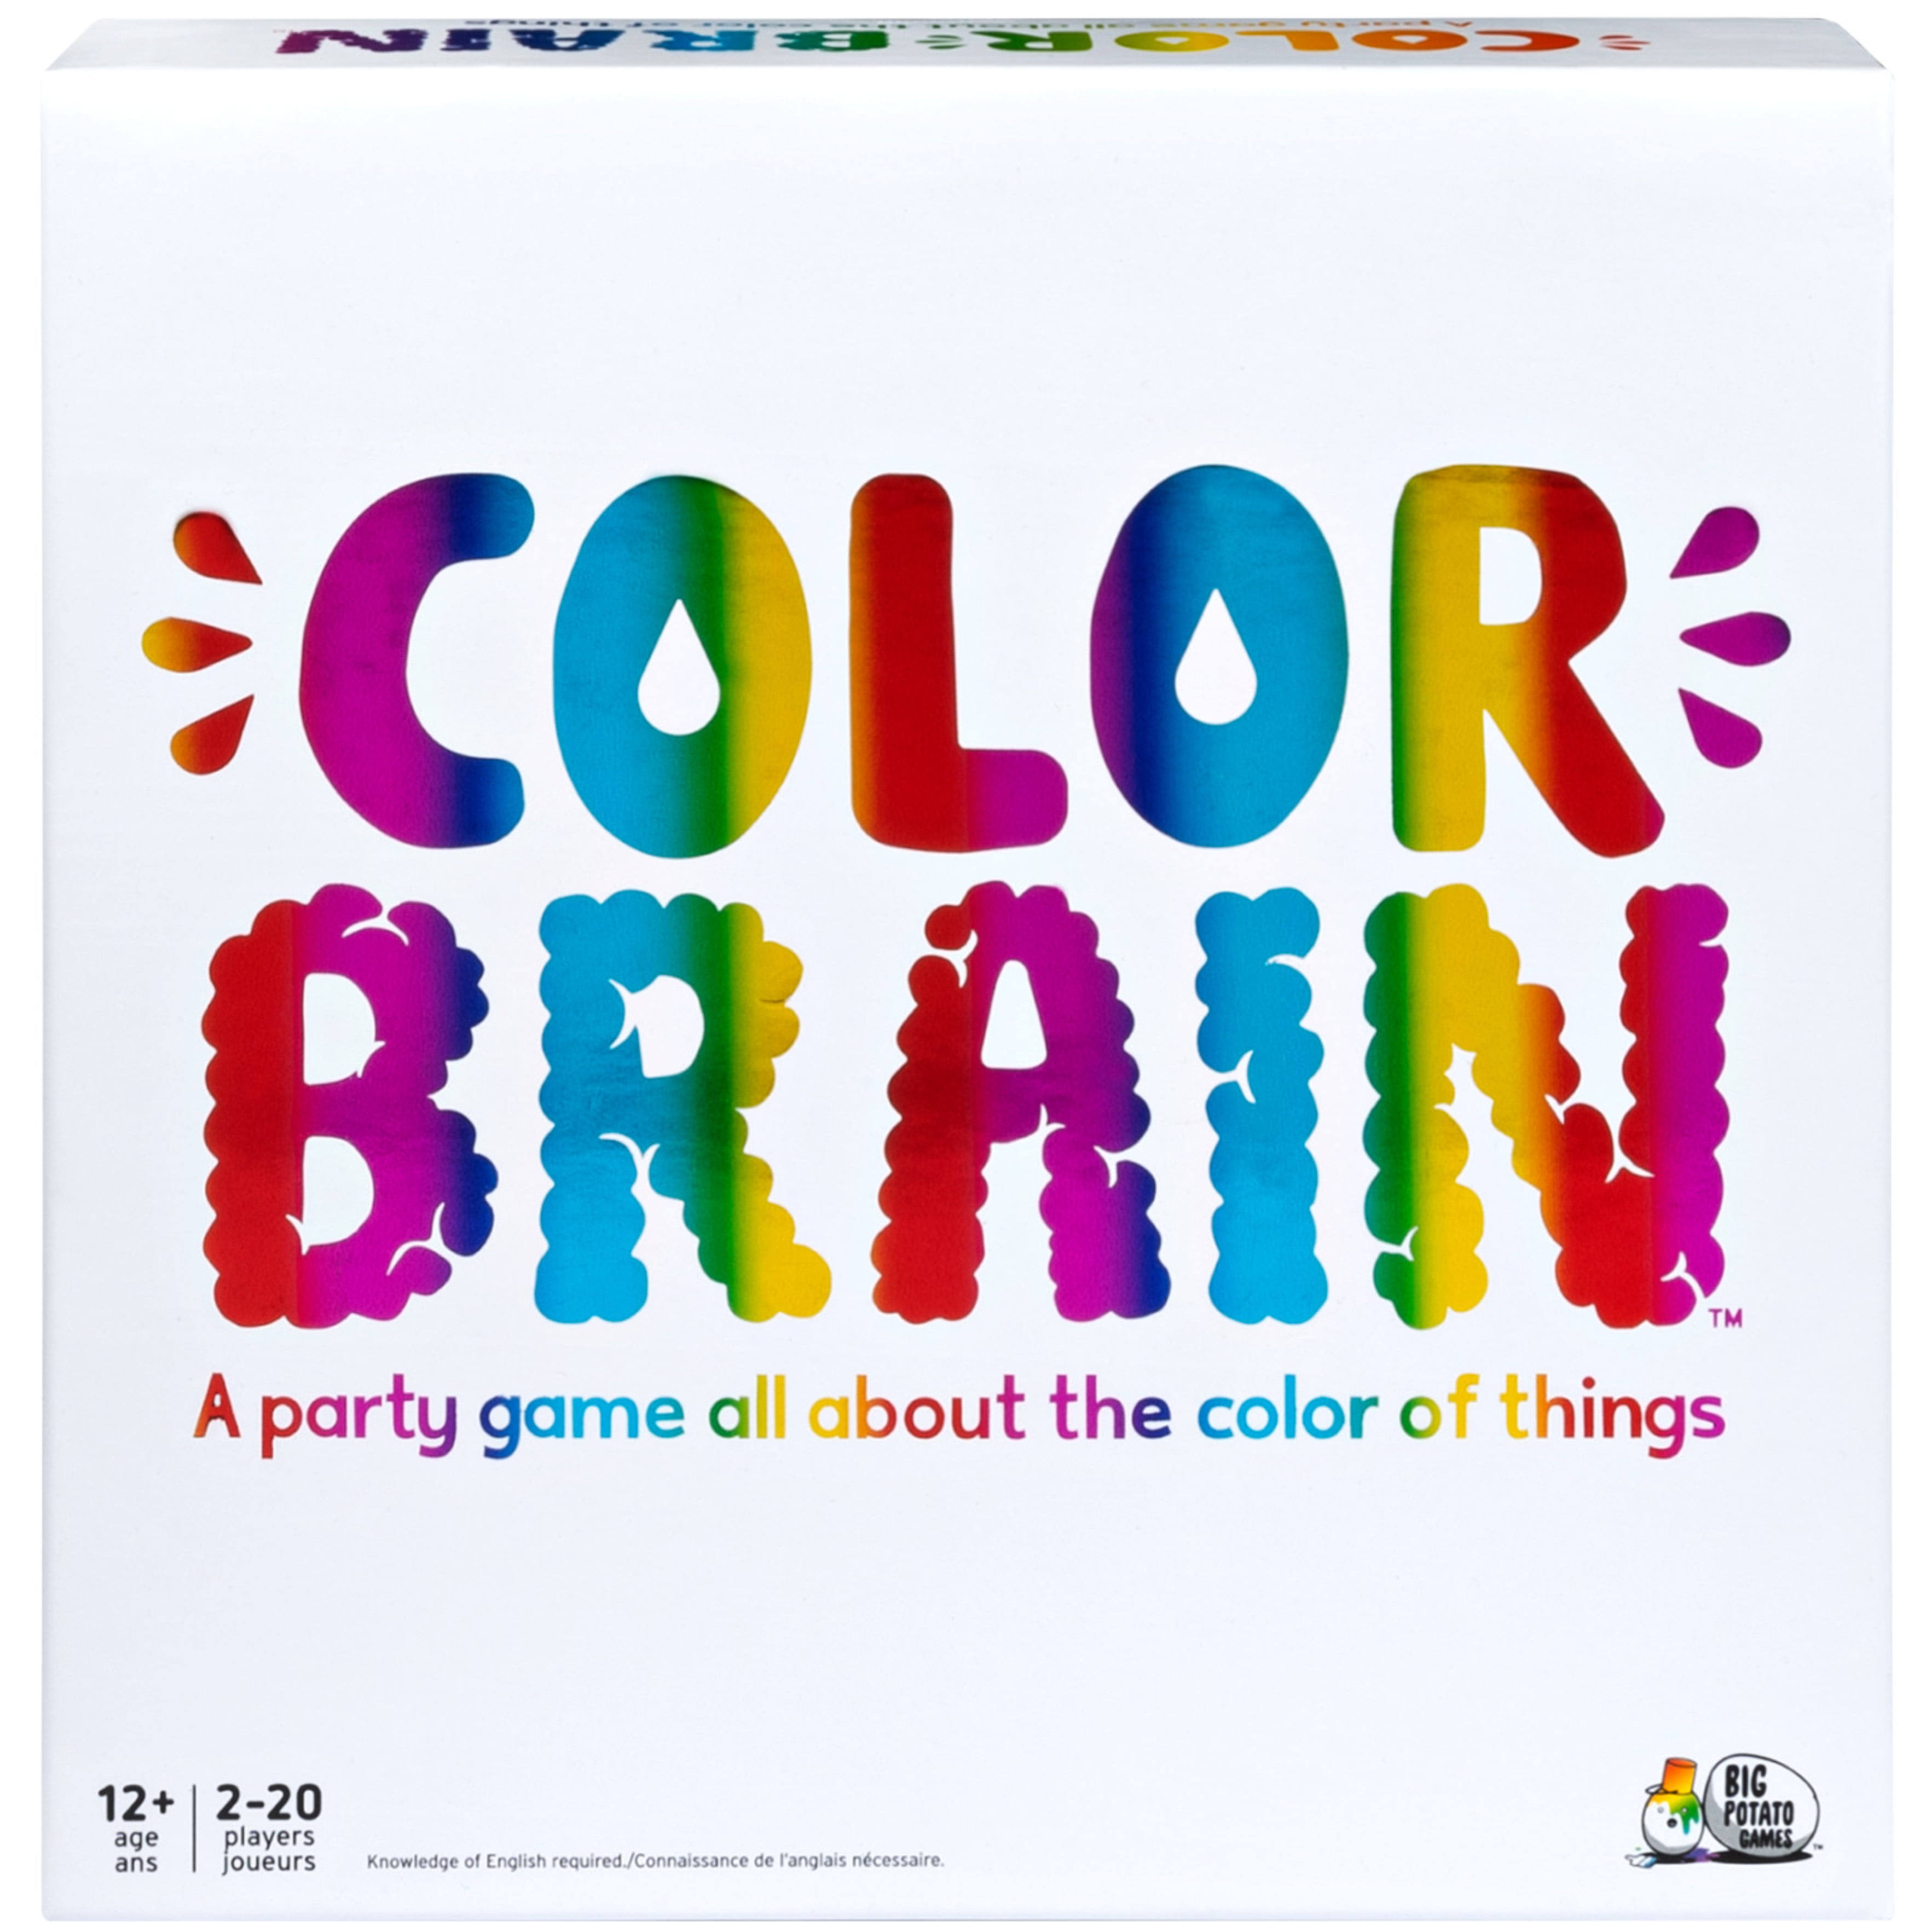 Colorbrain - Award-Winning Family Board Game - Family Board Games for